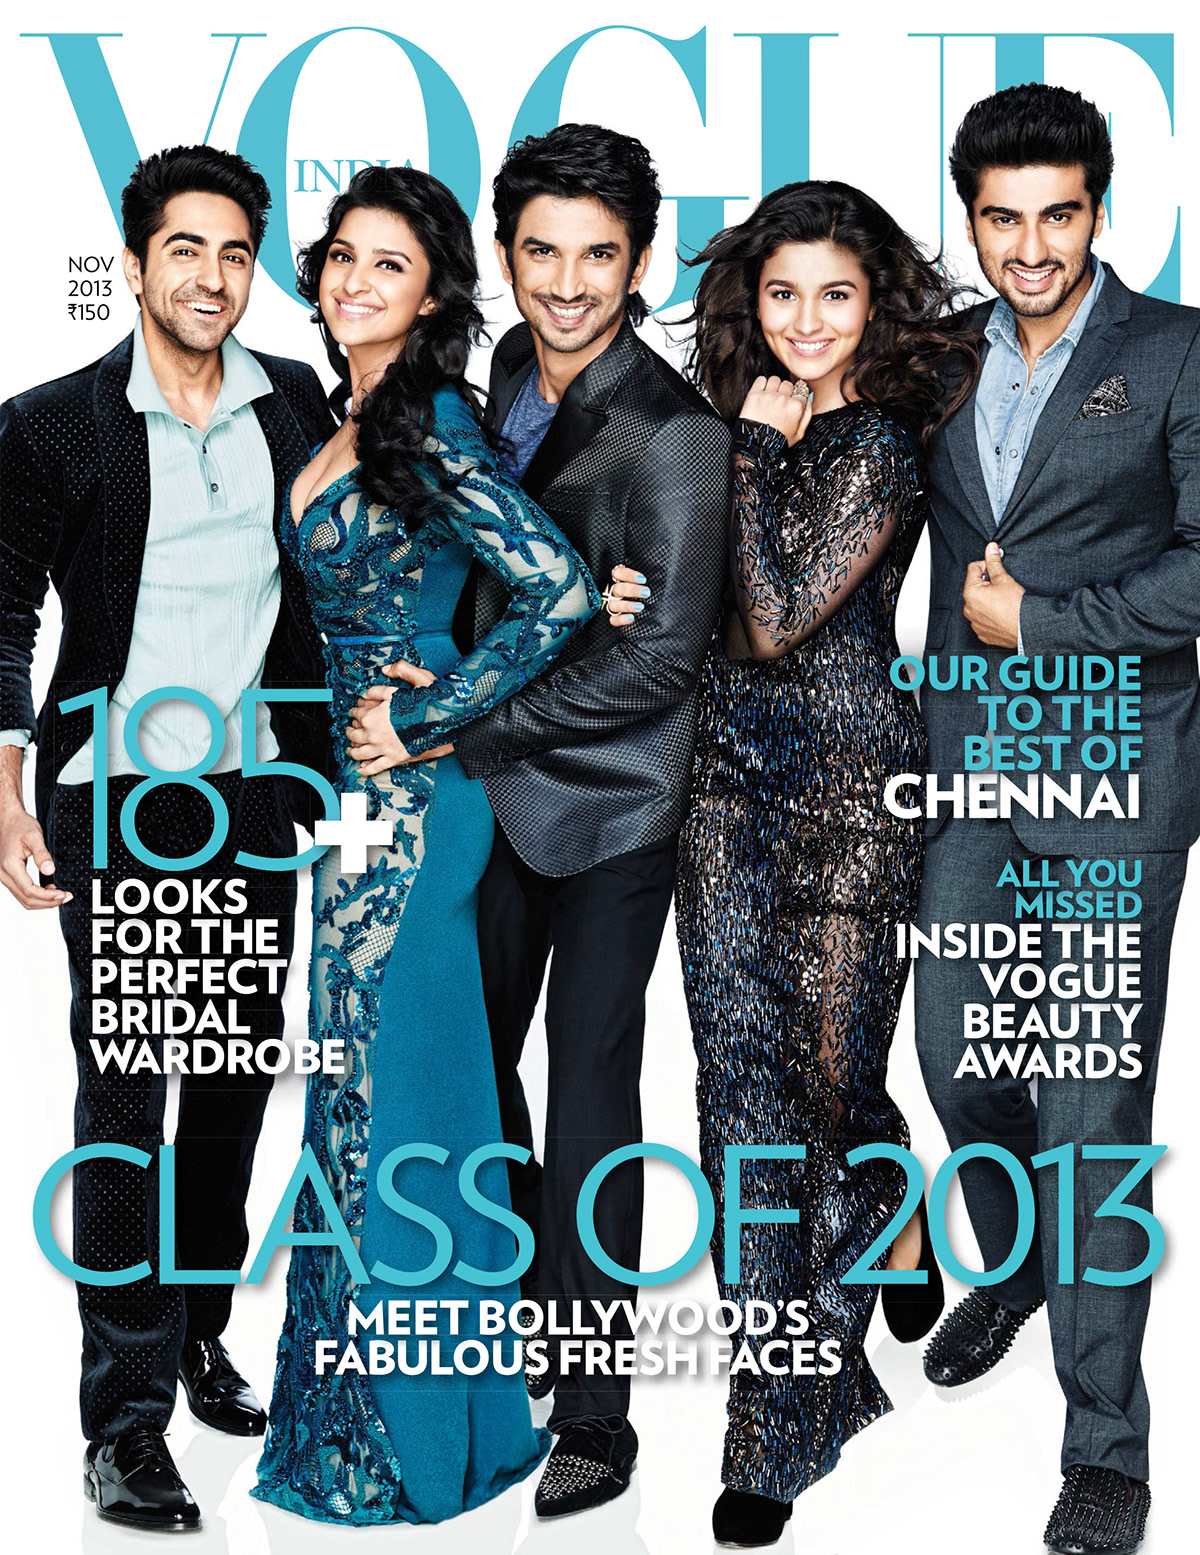 vogue cover India editorial Bollywood